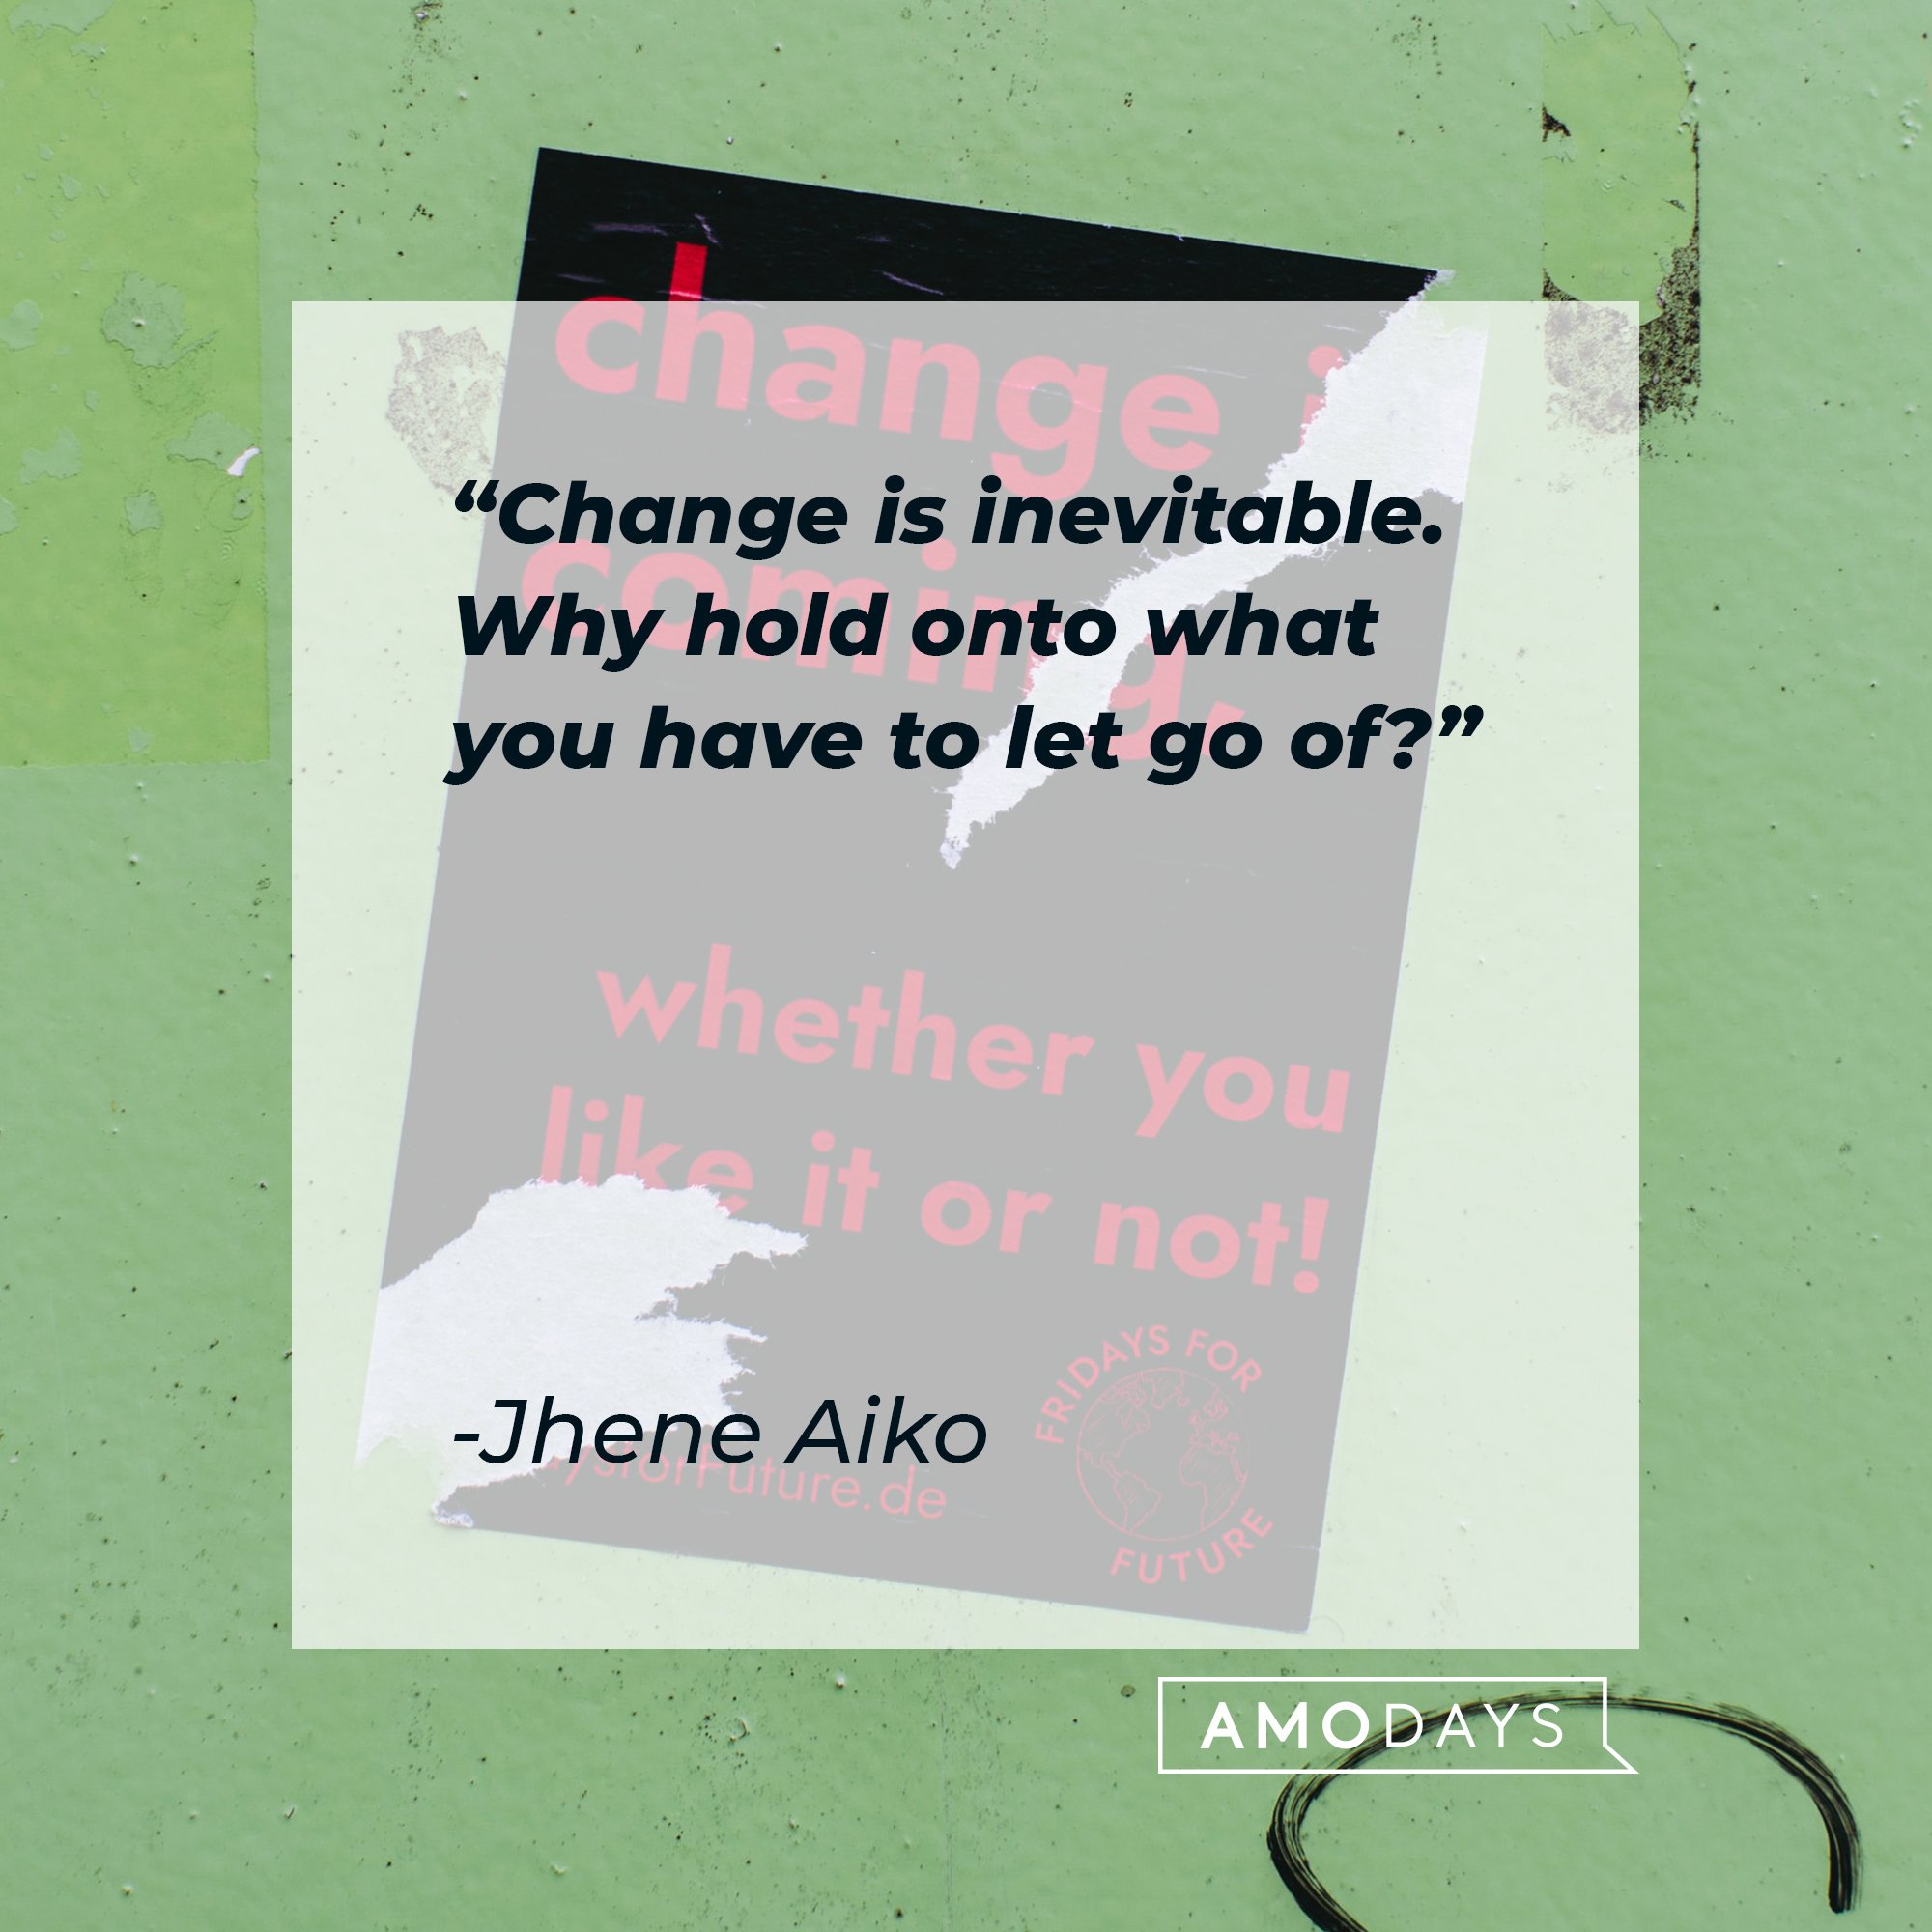   Jhene Aiko’s quote: "Change is inevitable. Why hold onto what you have to let go of?" | Image: AmoDays